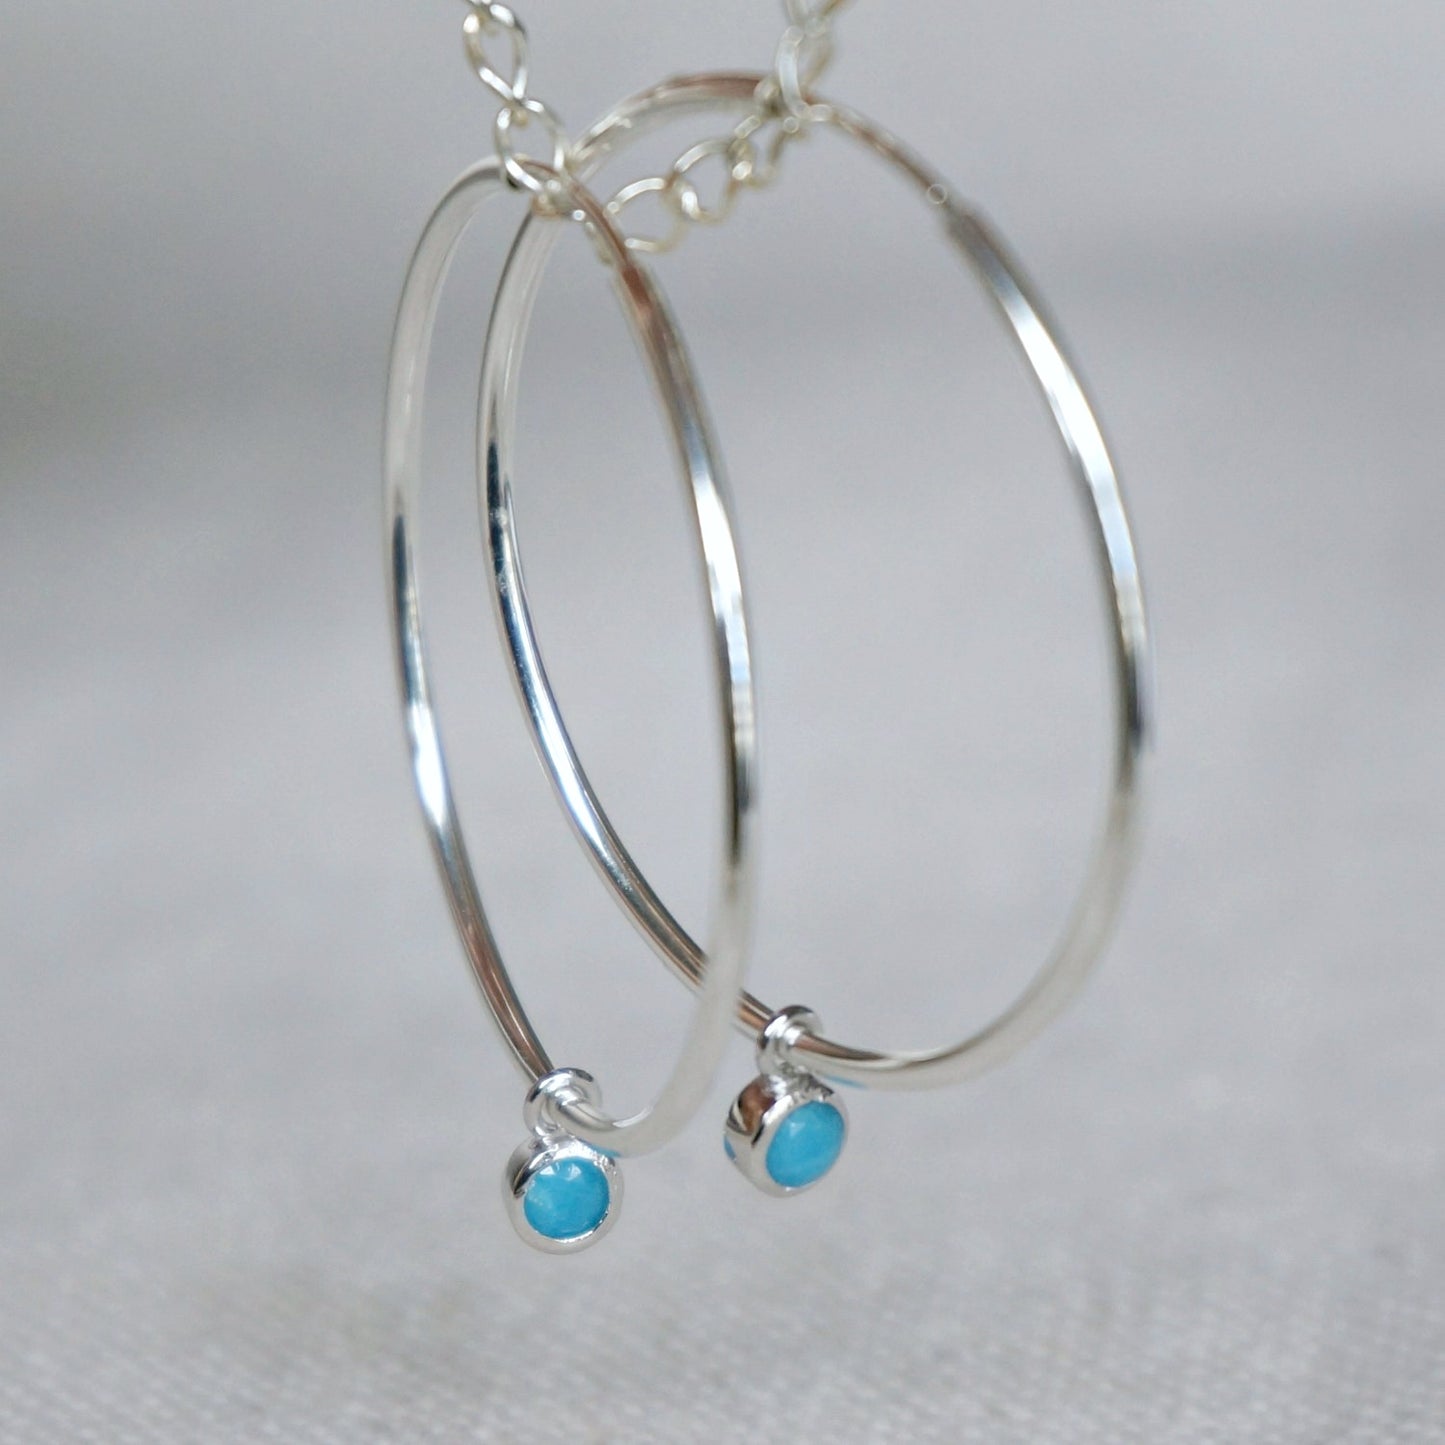 Load image into Gallery viewer, Avena Turquoise Hoop Earrings - SOWELL JEWELRY
